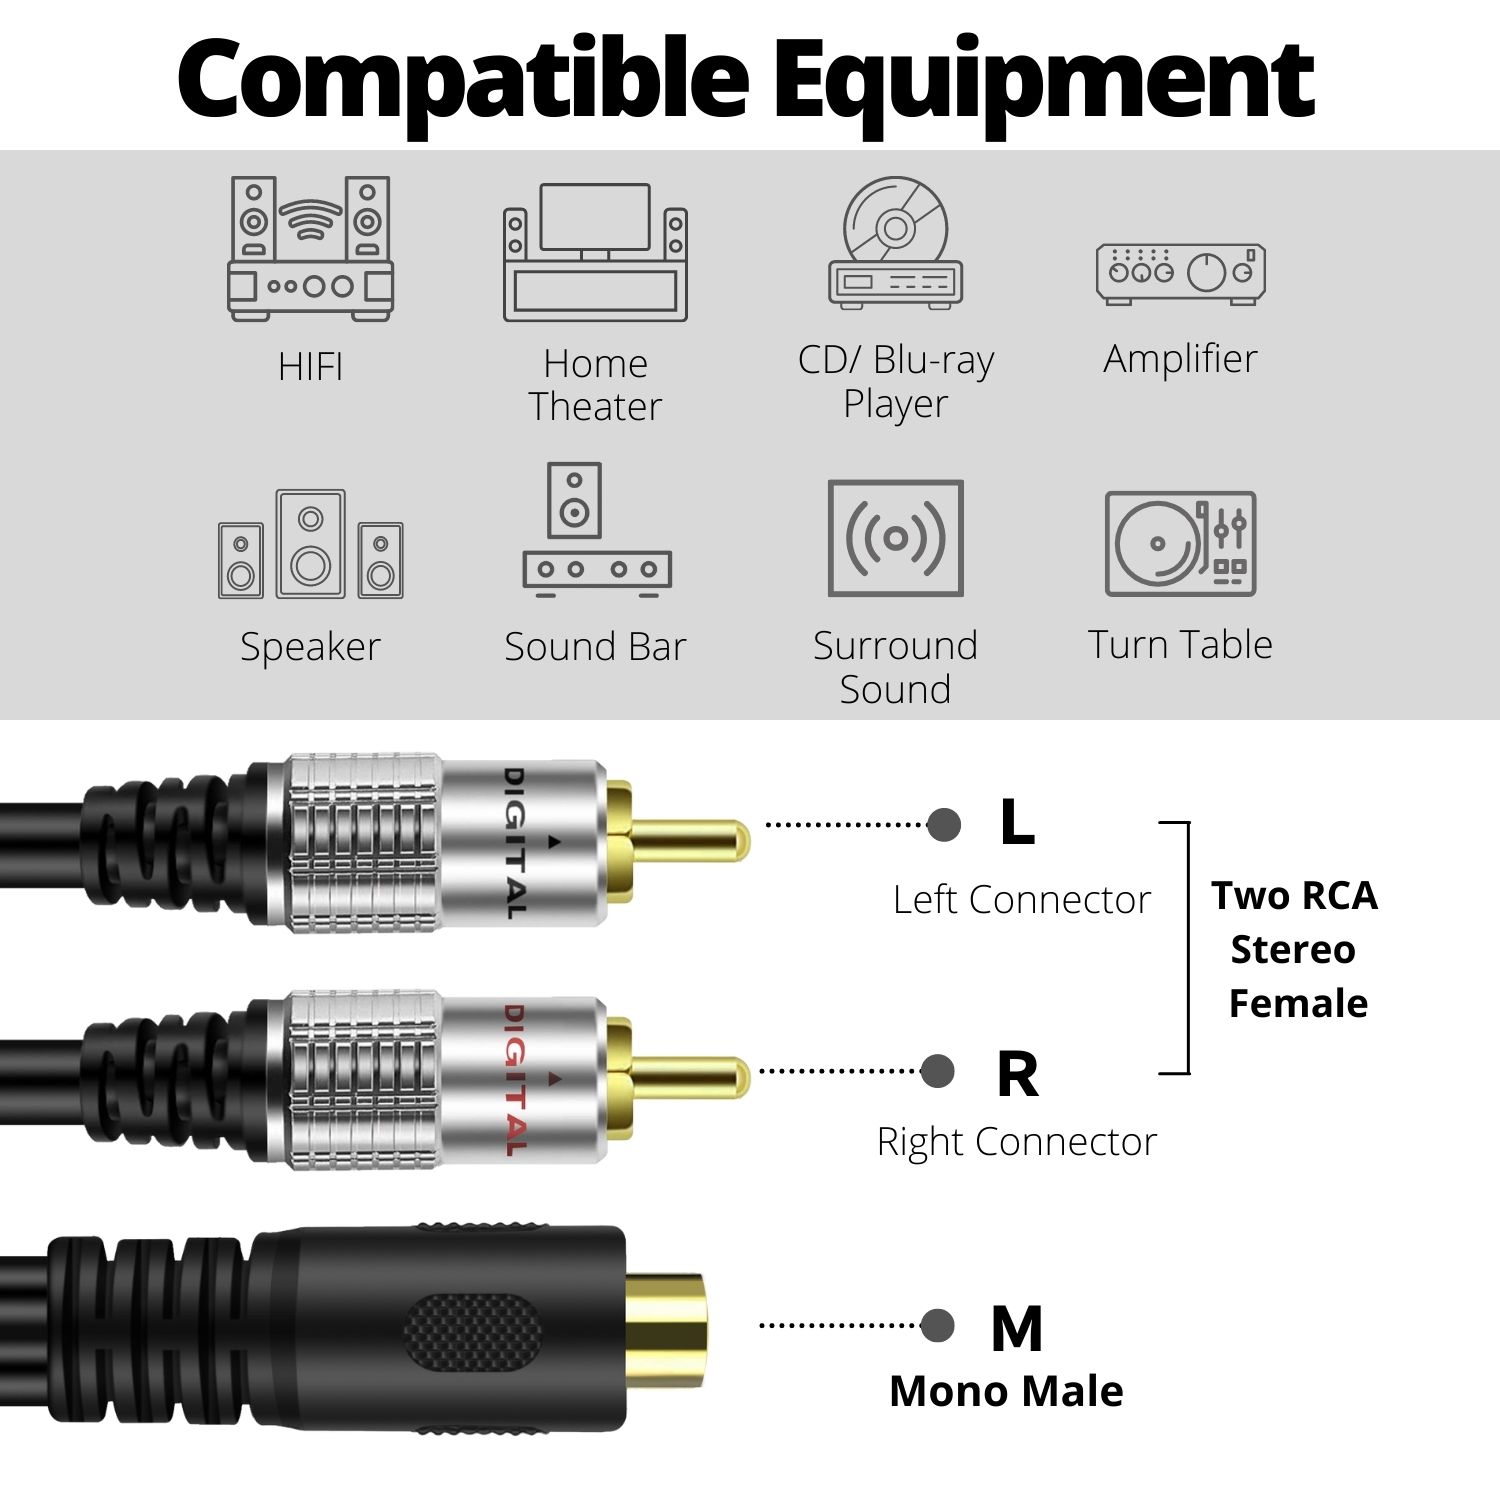 Premium RCA Y Adapter Cable Splitter (6 Inch) - RCAF to Dual RCA Y-Cable 1-Female to 2-Male Connector Wire Cord Plug Jack for Digital Audio or Subwoofer - (Stereo Female to Two RCA Mono Male) - image 3 of 7